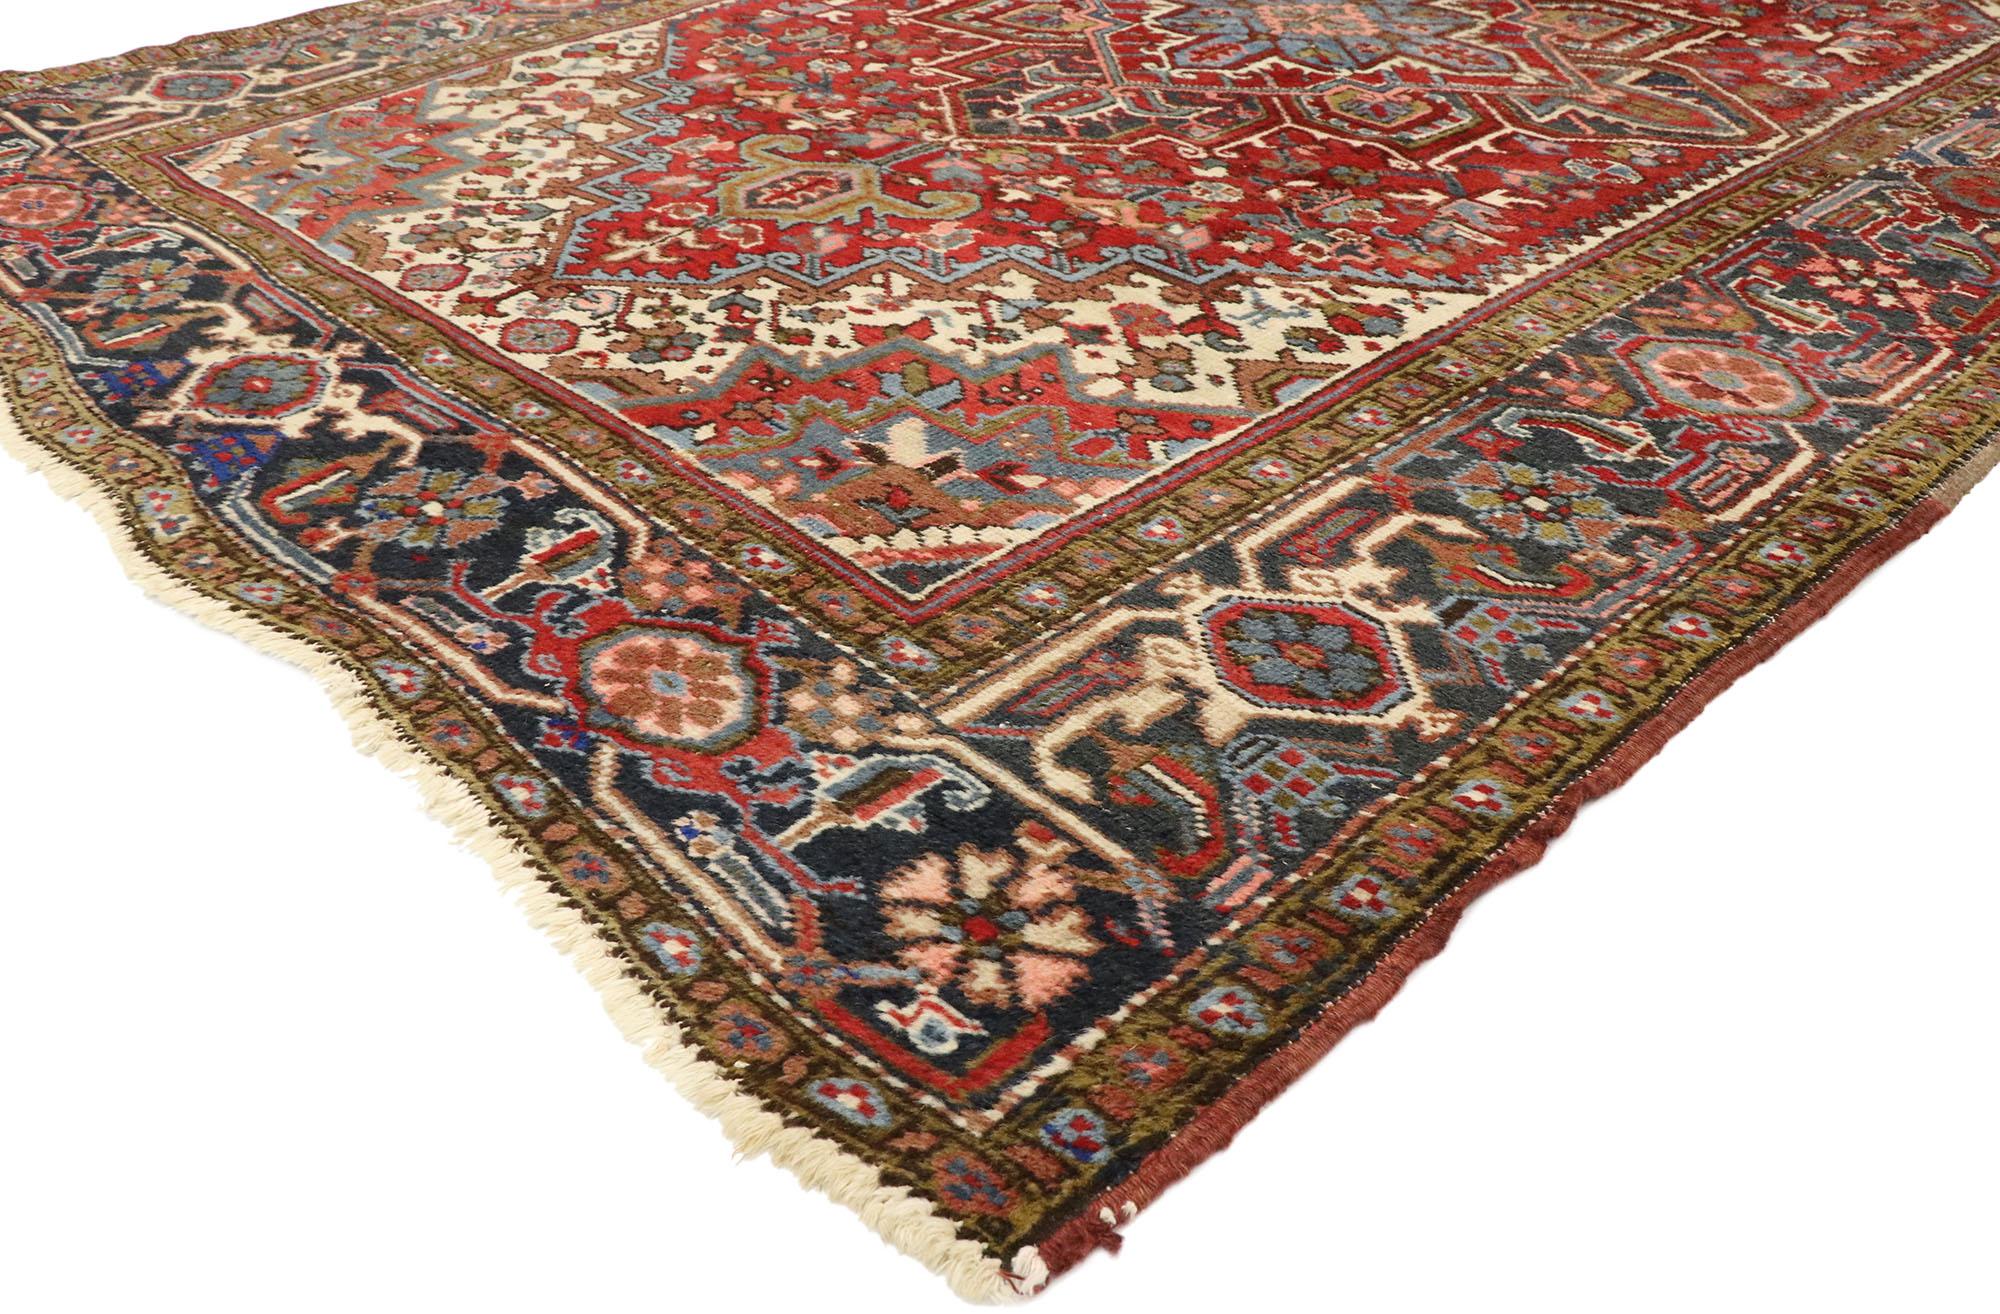 77456 antique Persian Heriz rug with Modern Federal style. With timeless appeal, refined colors, and architectural design elements, this hand knotted wool antique Persian Heriz rug can beautifully blend modern, contemporary, and traditional